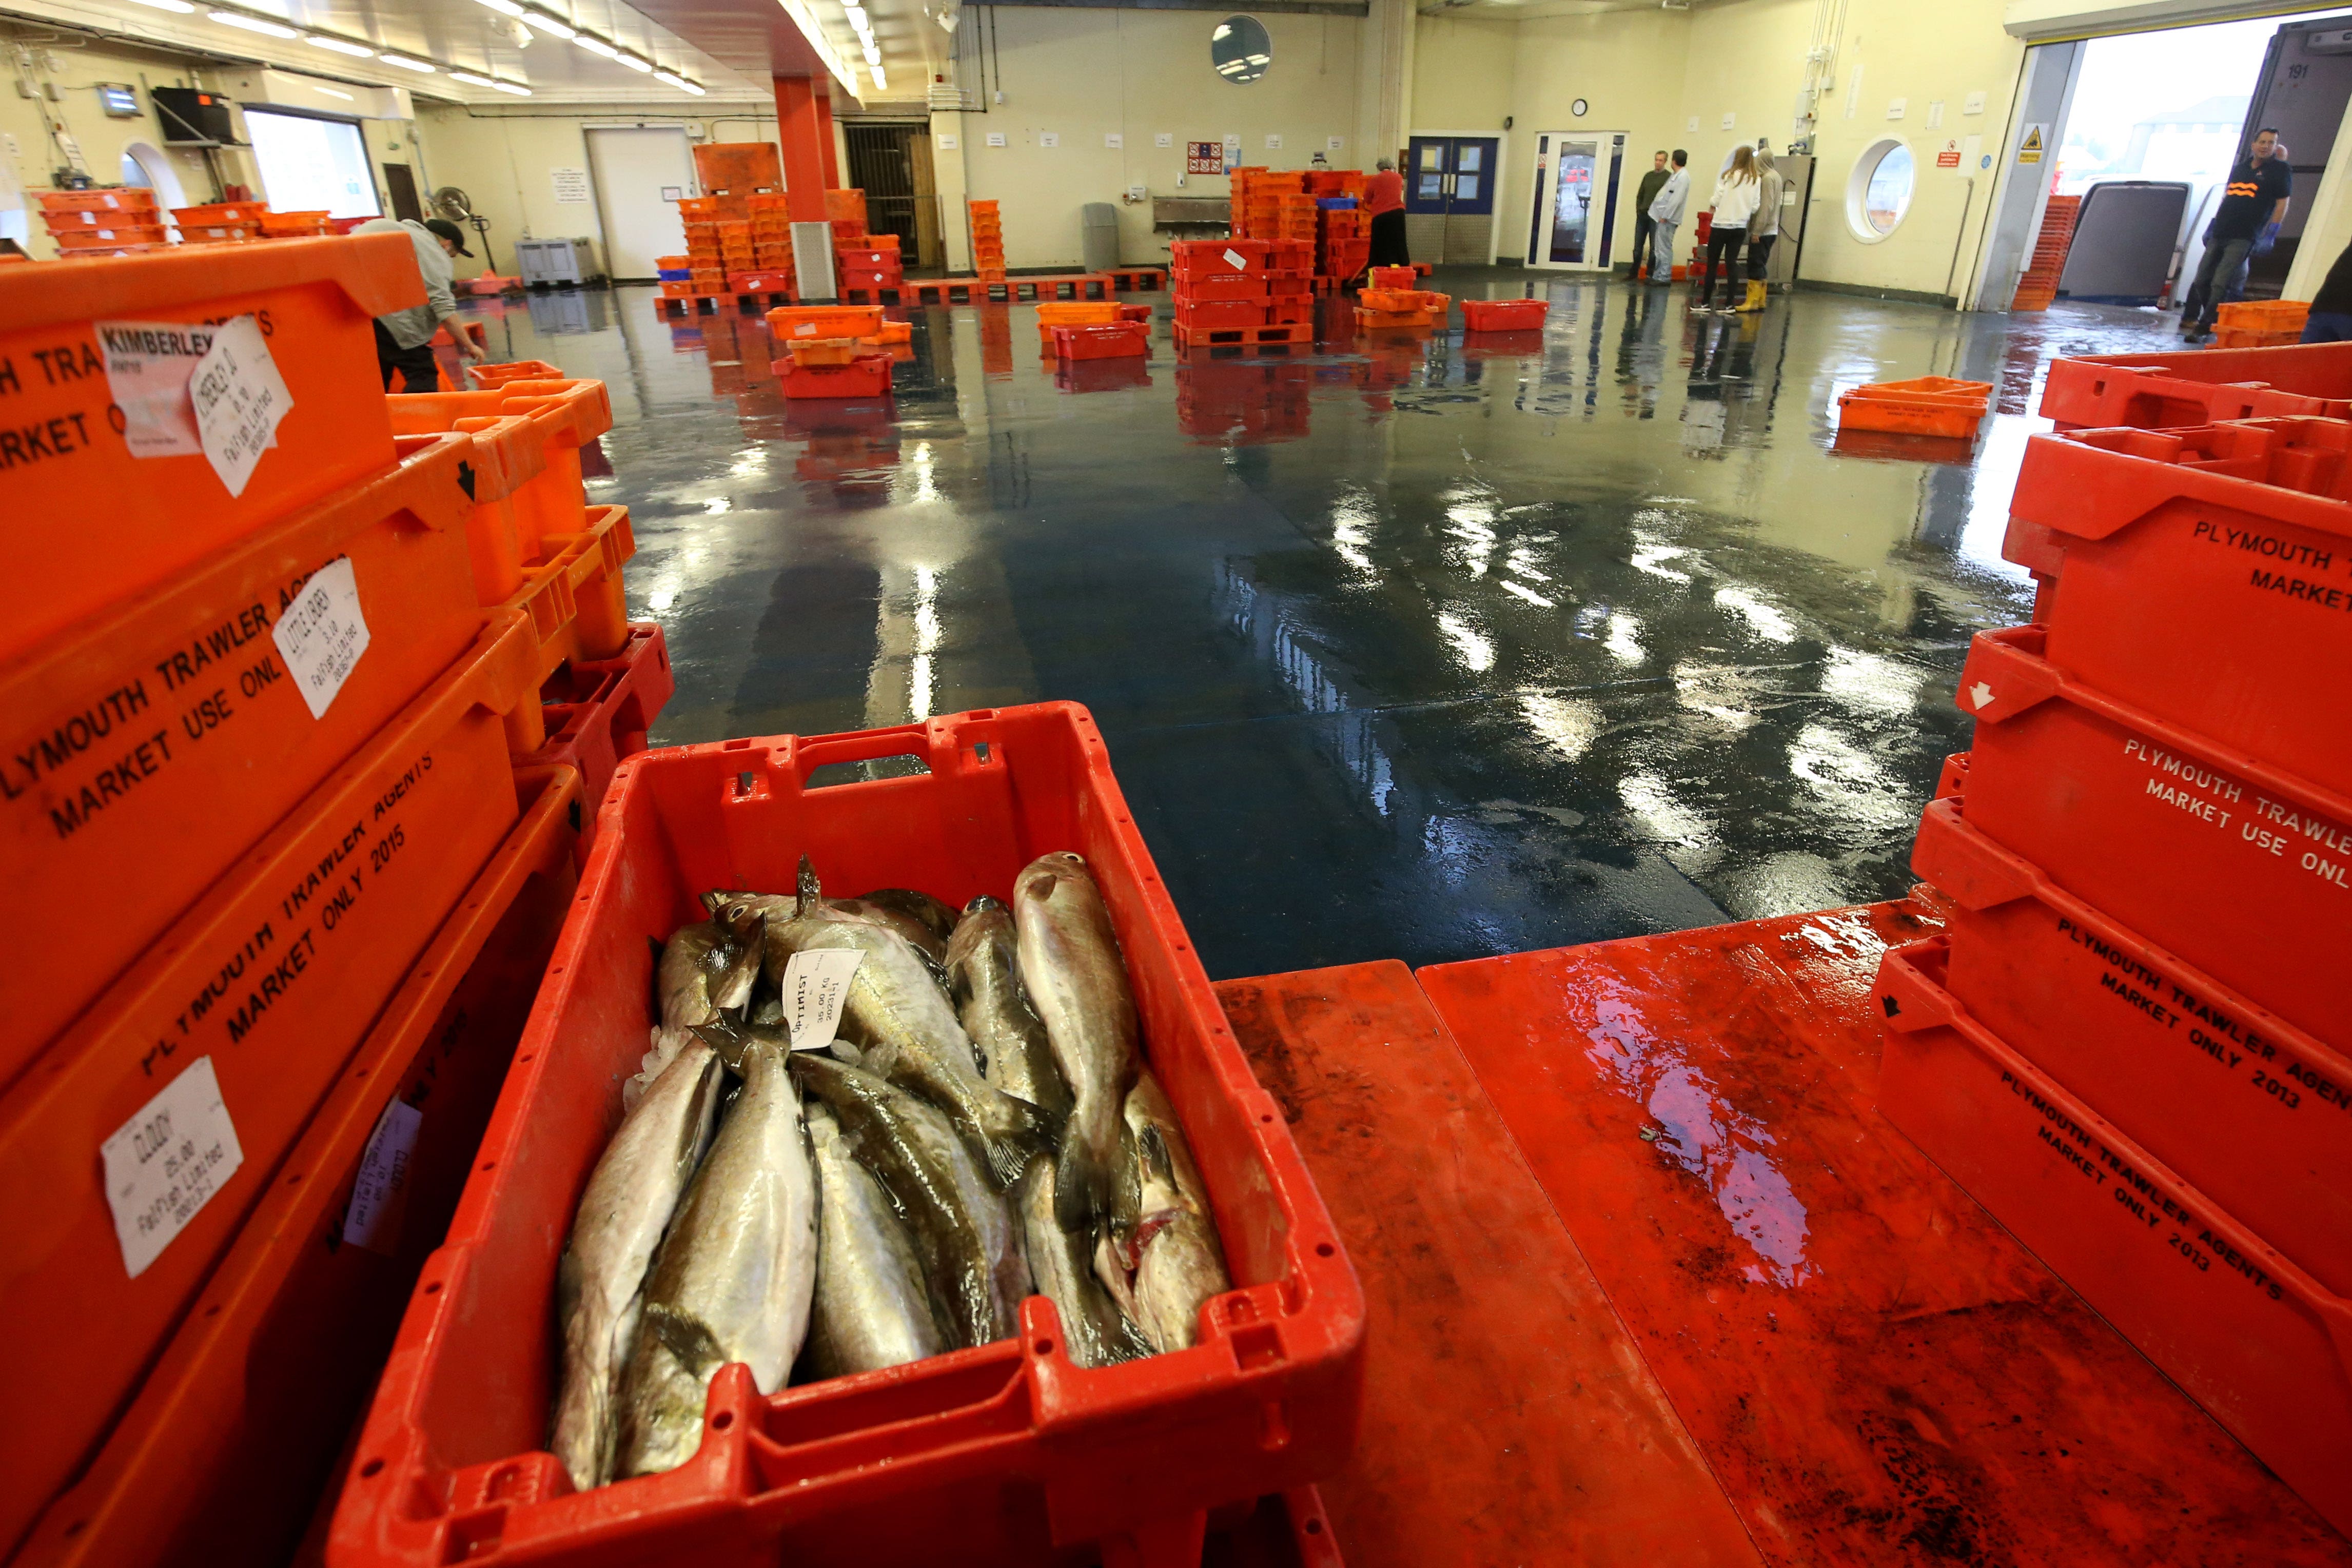 Fisheries that rely on stocks in the North Atlantic may struggle to sustain their catches if the high temperatures damage fish populations (Steve Parsons/PA)